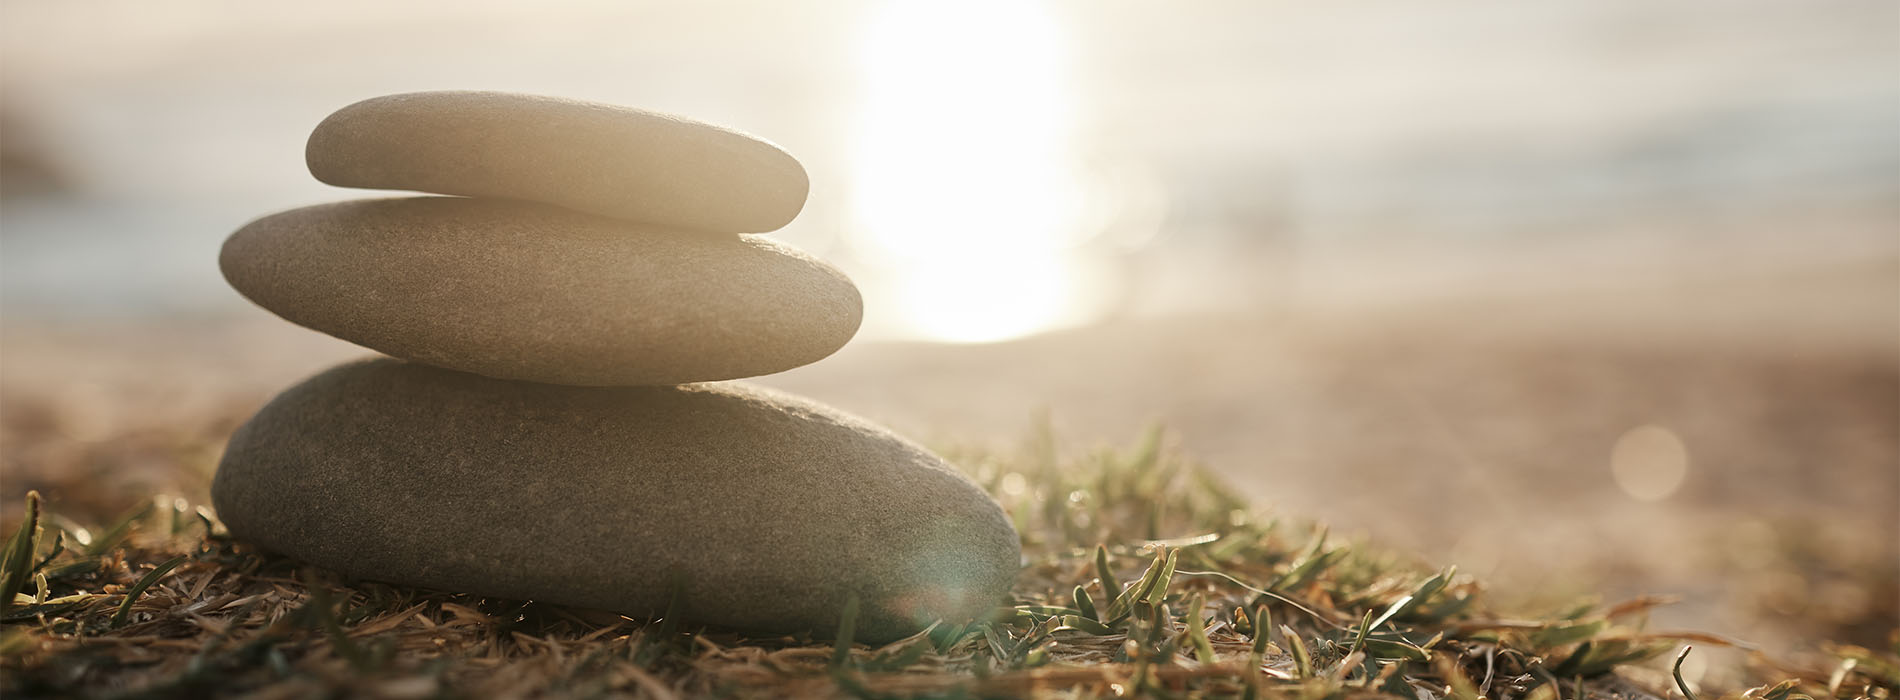 The first step toward mindfulness